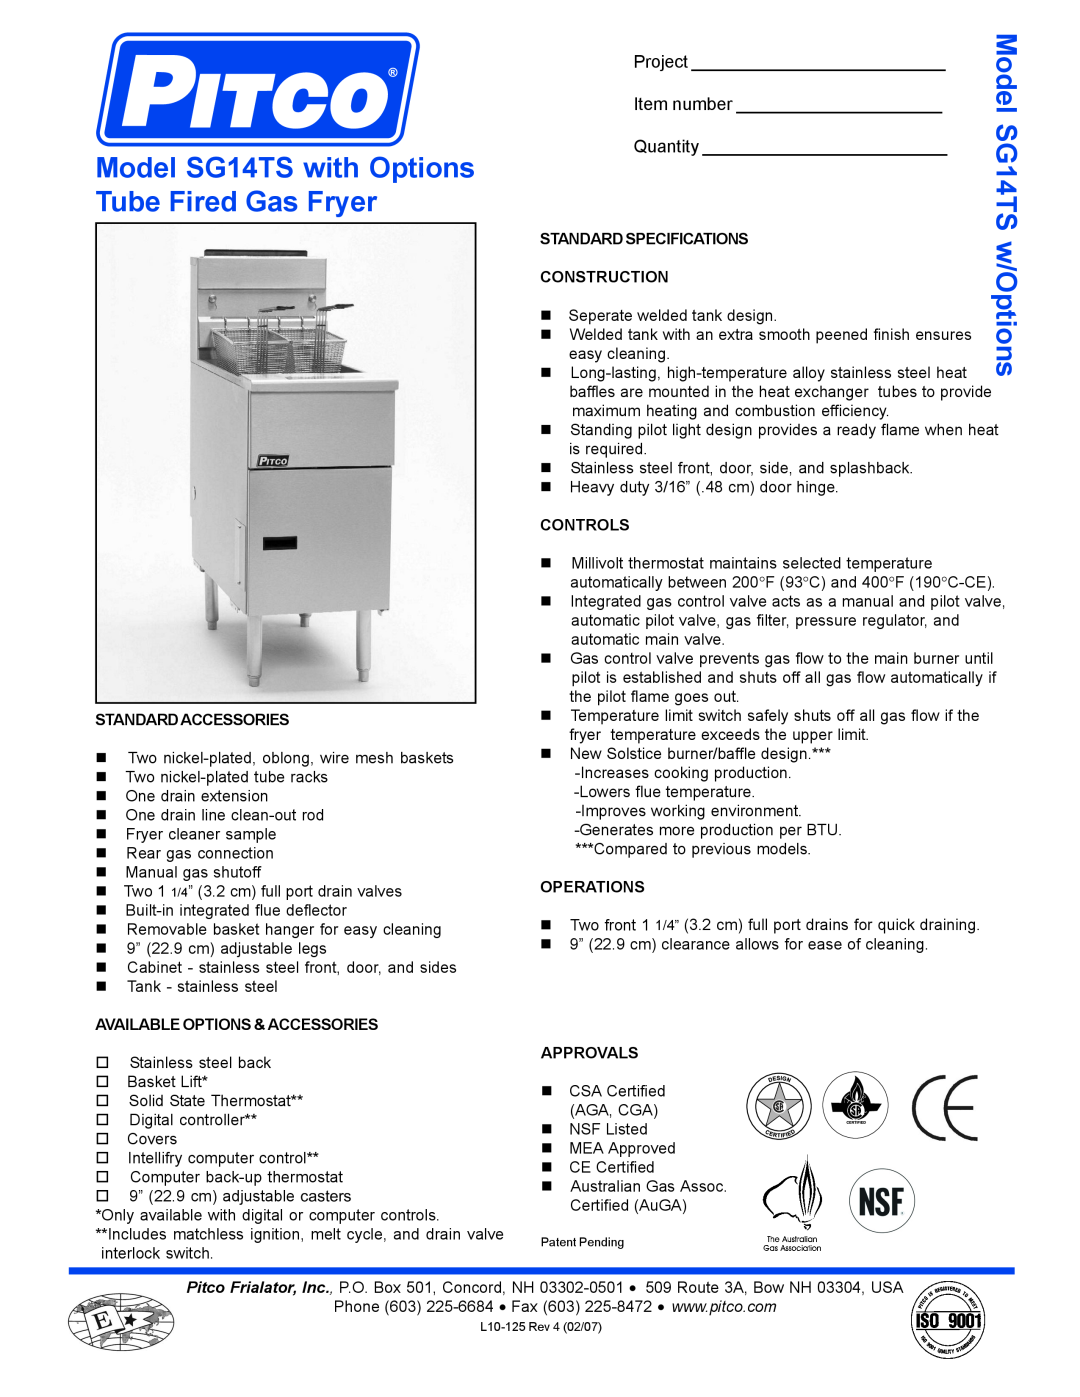 Pitco Frialator specifications Model SG14TS with Options Tube Fired Gas Fryer, w/Options, Project, Item number 